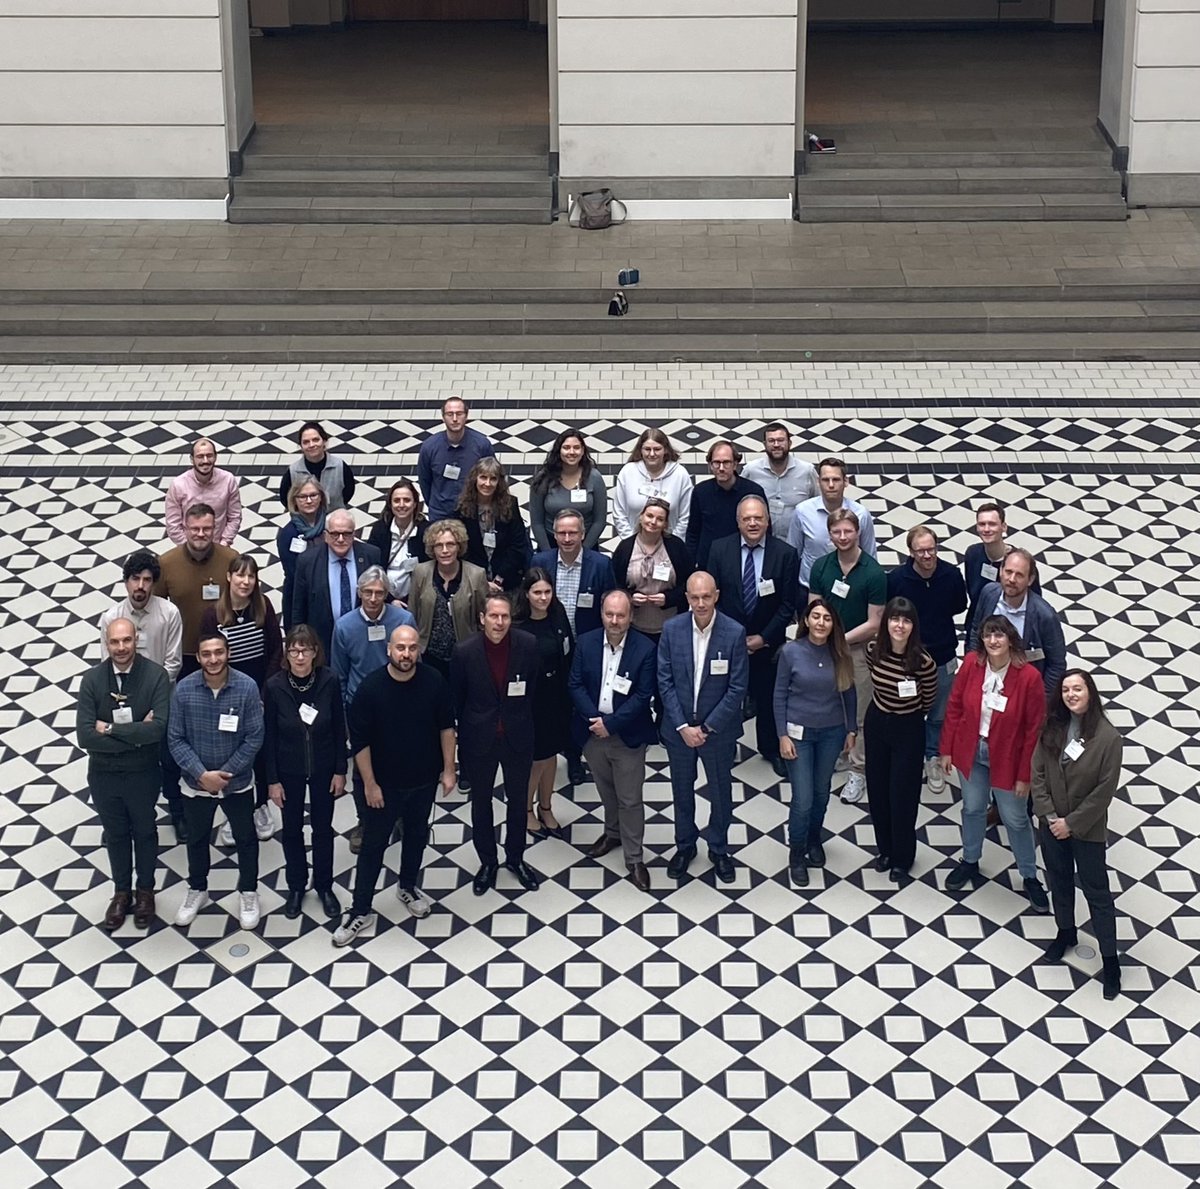 It’s a wrap! Today our General Assembly came together to discuss how our body of students, staff and professors can shape ENHANCE in the most impactful way for the years to come. A warm welcome also to our new delegates from @tudelft, @PolitechnikaGda and @ETH_en! #ShapingEurope